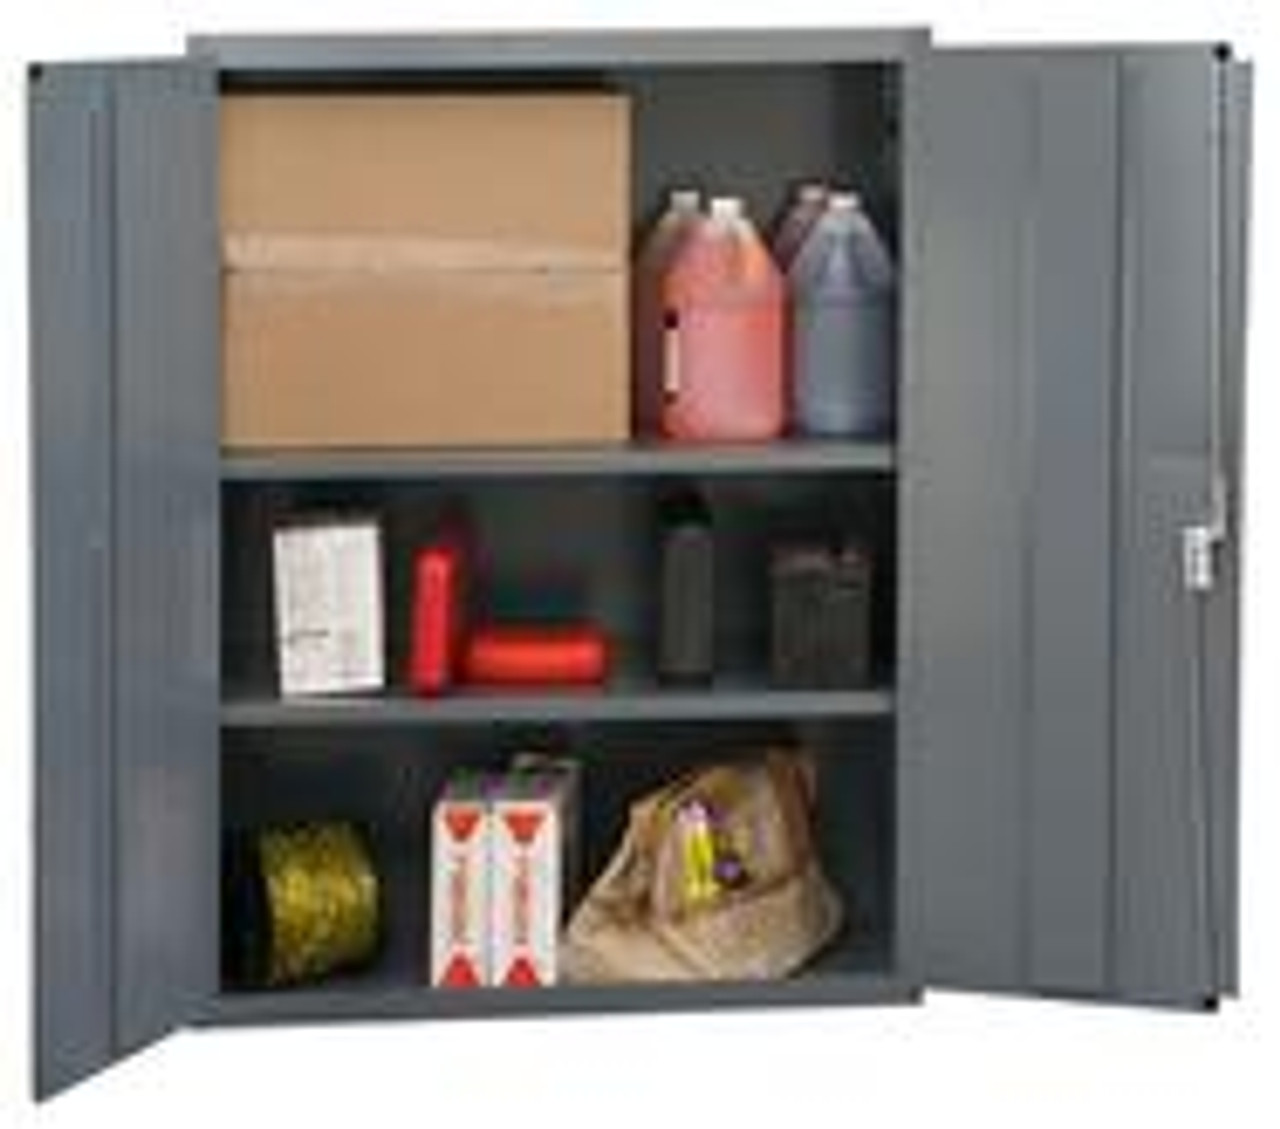 https://cdn11.bigcommerce.com/s-iaql5othzt/images/stencil/1280x1280/products/10325/14710/36-Inch-Wide-x-18-Inch-Deep-Cabinets-with-Adjustable-Shelves-8920-7BC7C67EA1E03__42444.1690567128.jpg?c=1